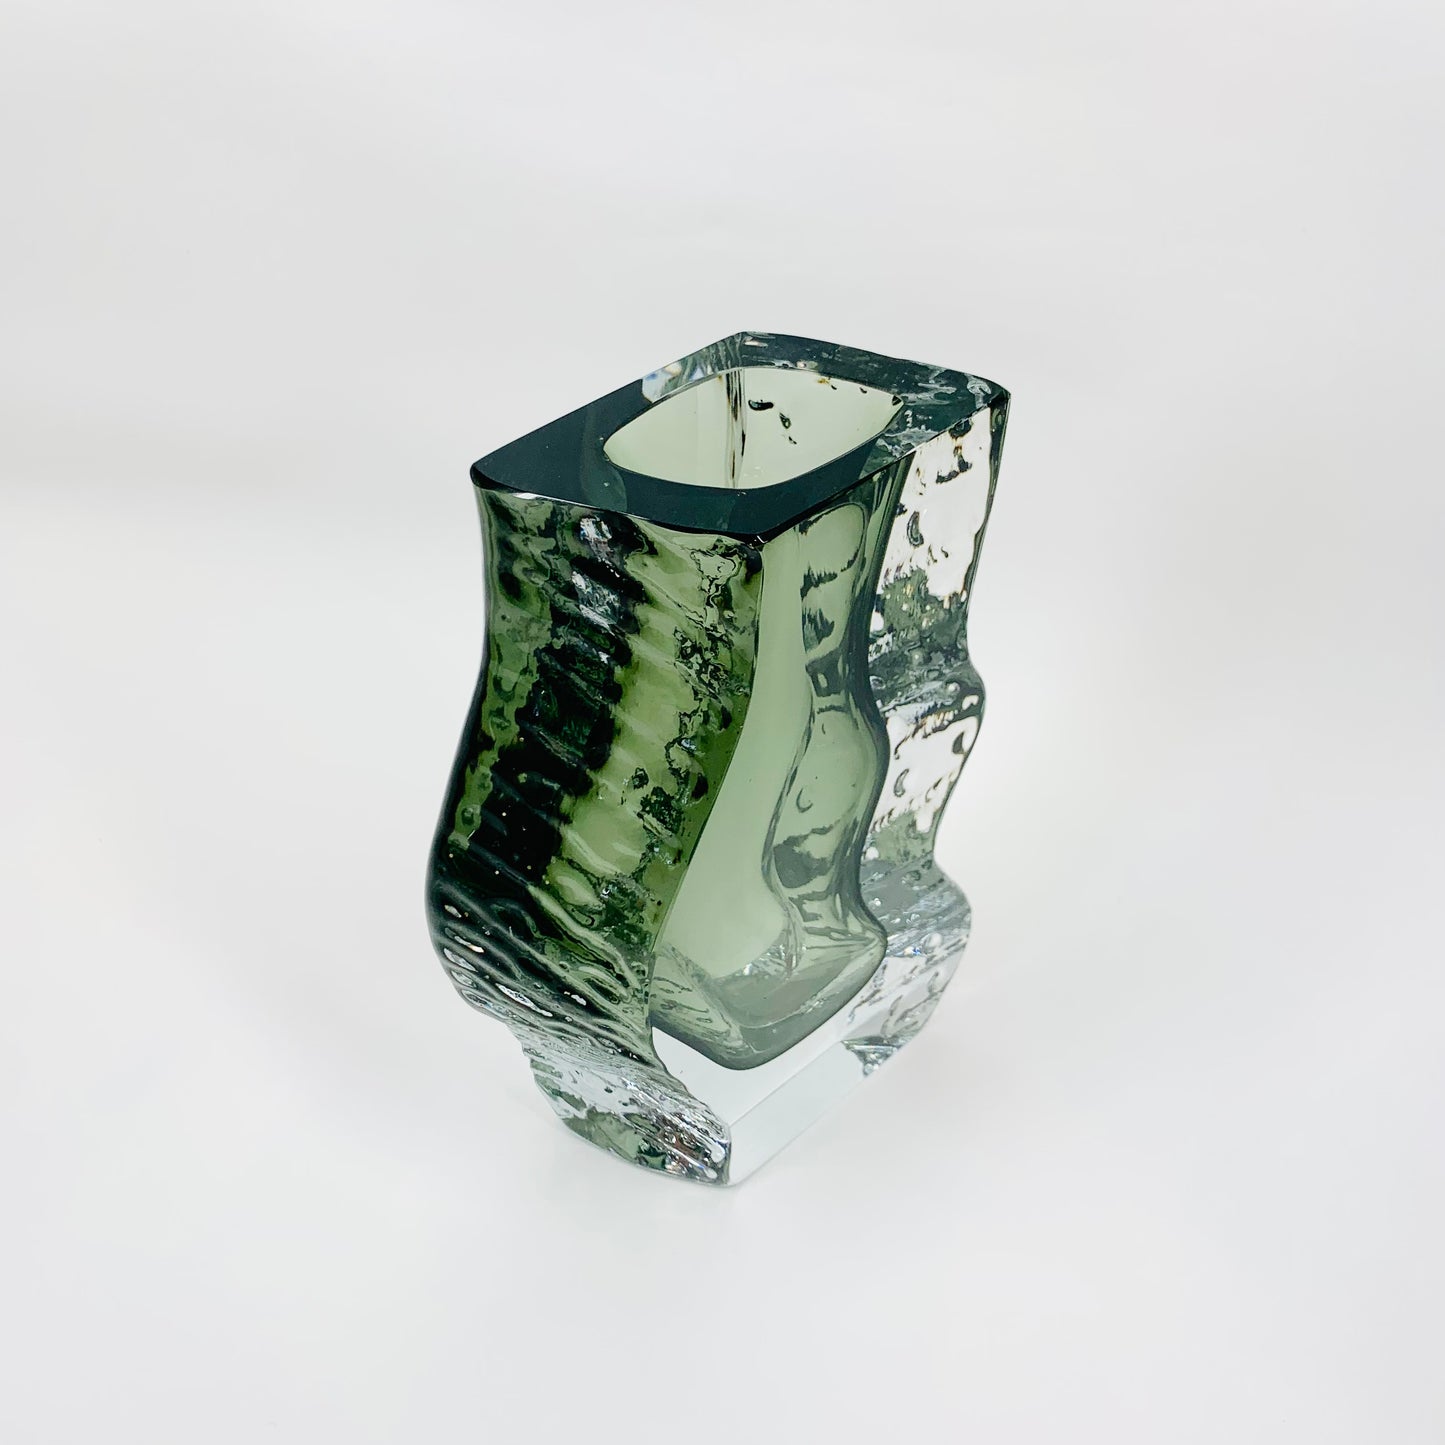 Extremely rare large MCM grey textured Murano sommerso trapezoid glass vase by Mandruzzato